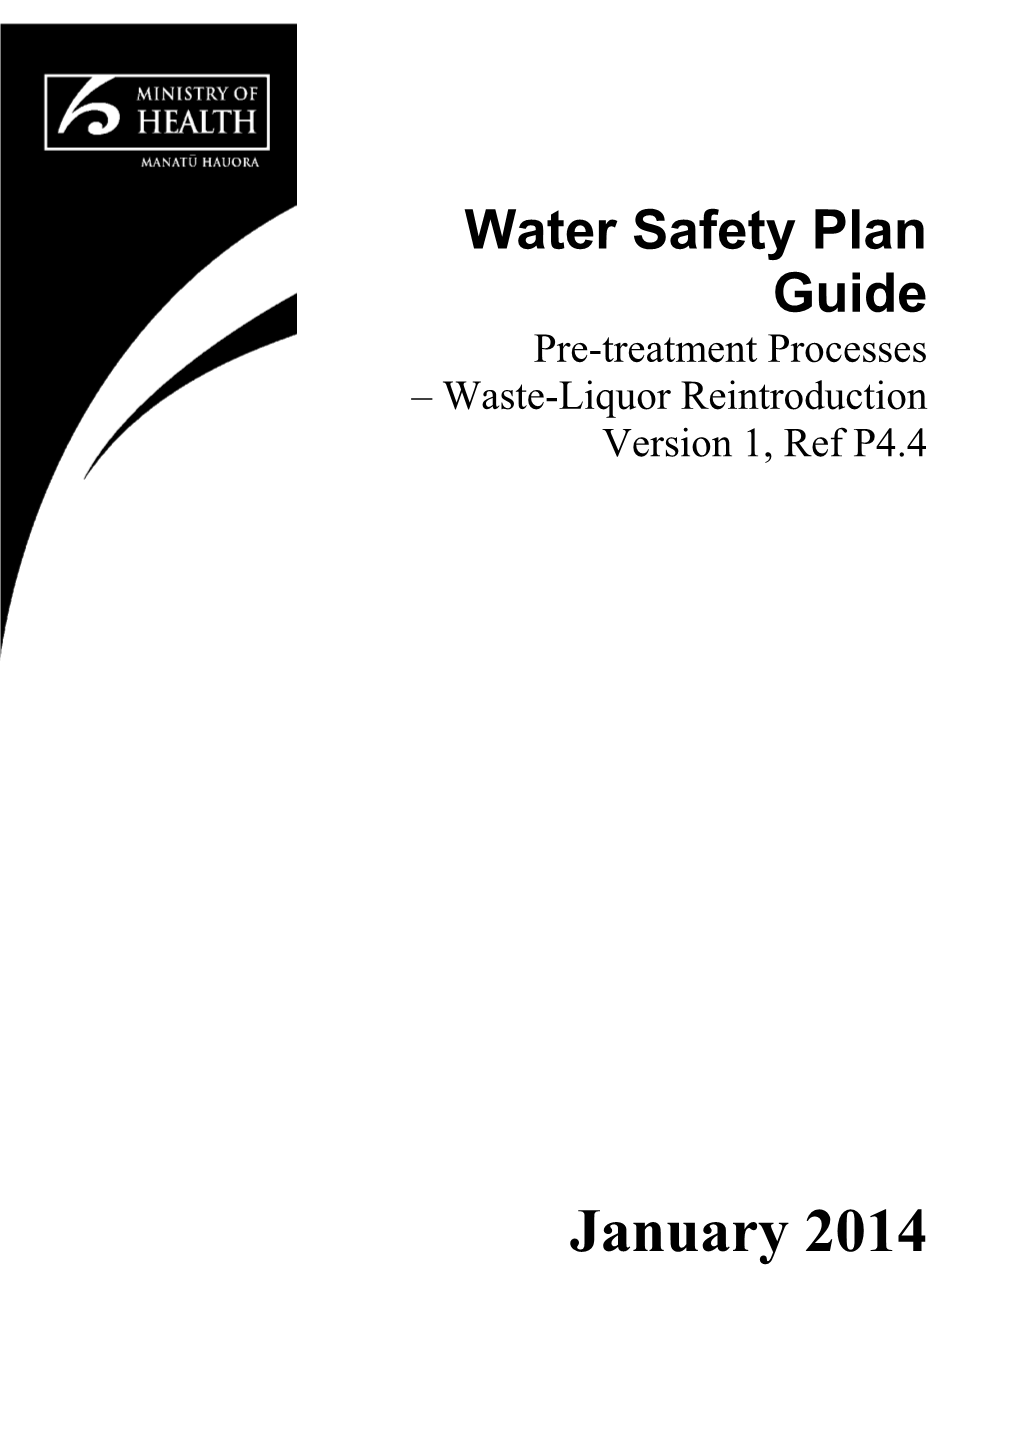 Water Safety Plan Guide: Pre-Treatment Processes Waste-Liquor Reintroduction